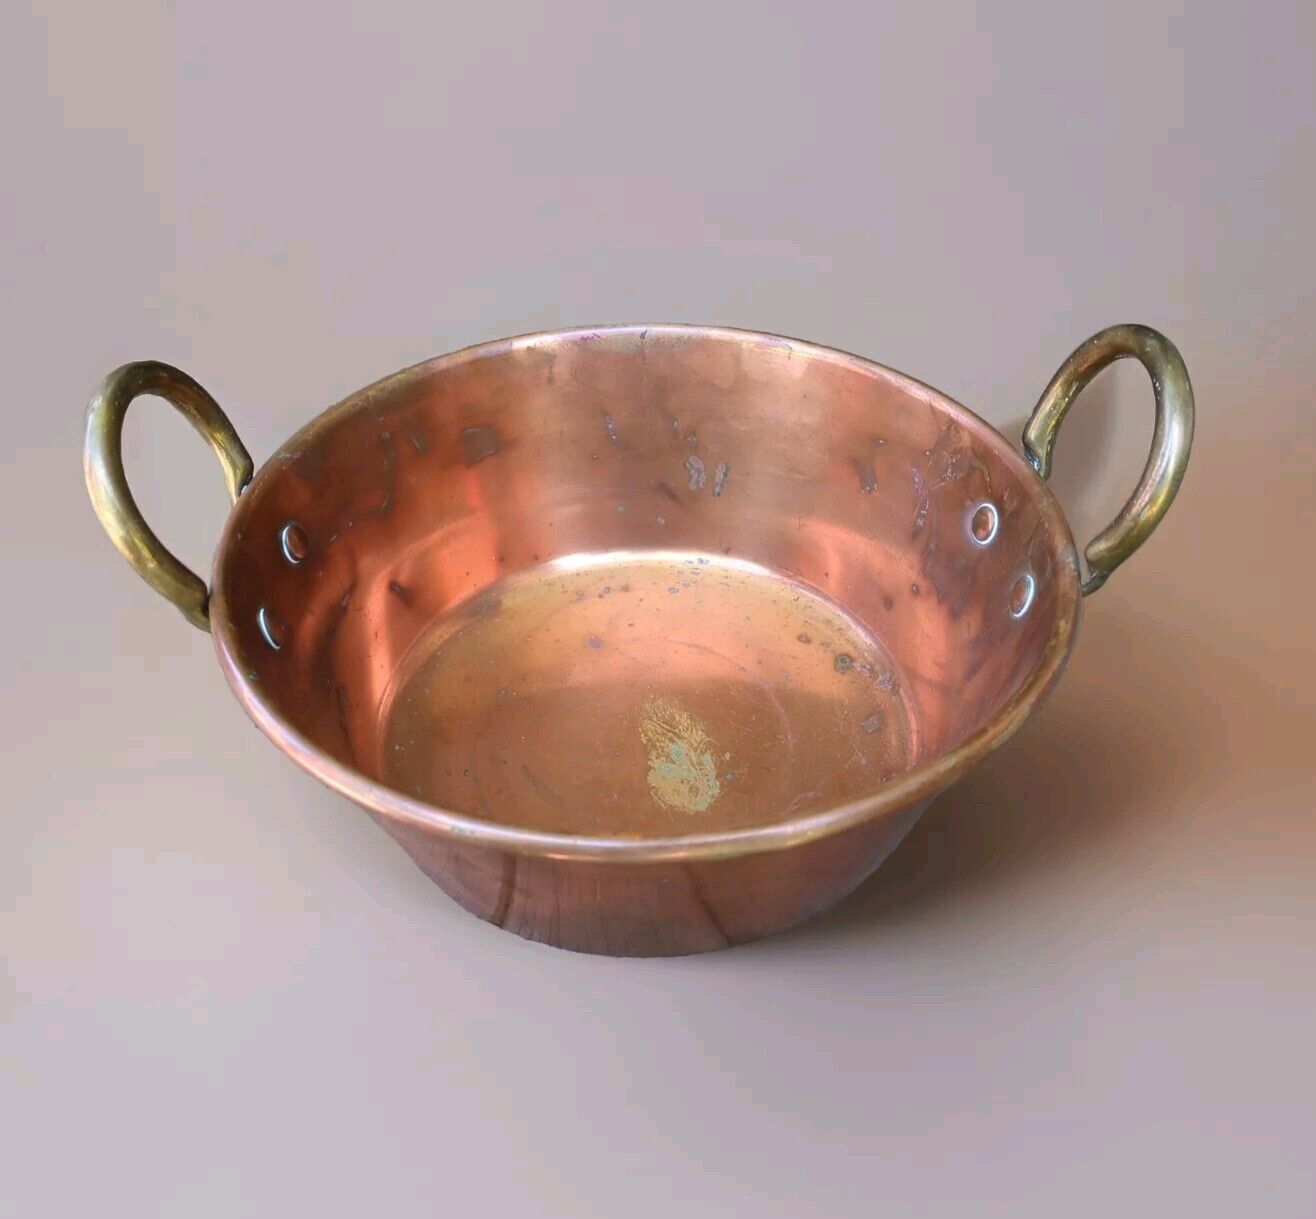 Heavy Antique Copper Jelly Pan☆Old French Copper Jam Pan 10.75